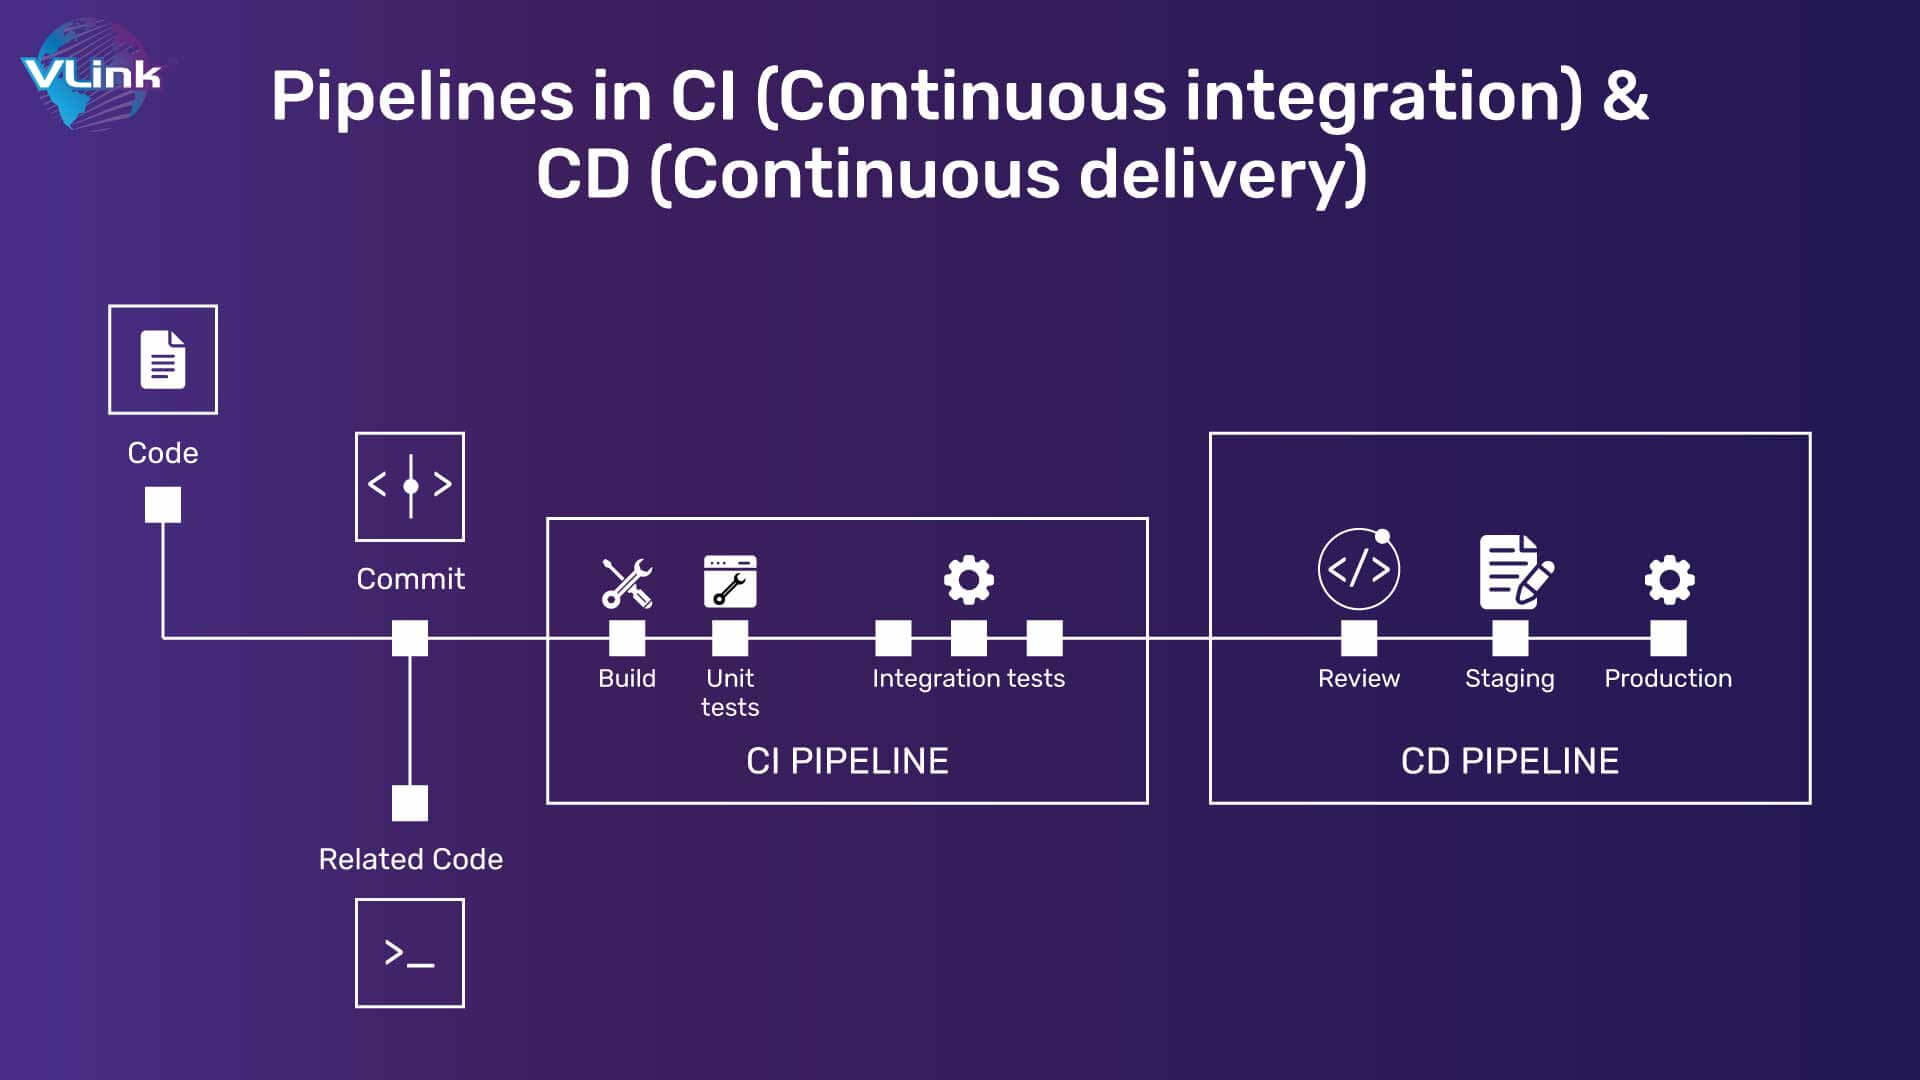 Pipelines in CI (Continuous integration) & CD (Continuous delivery)